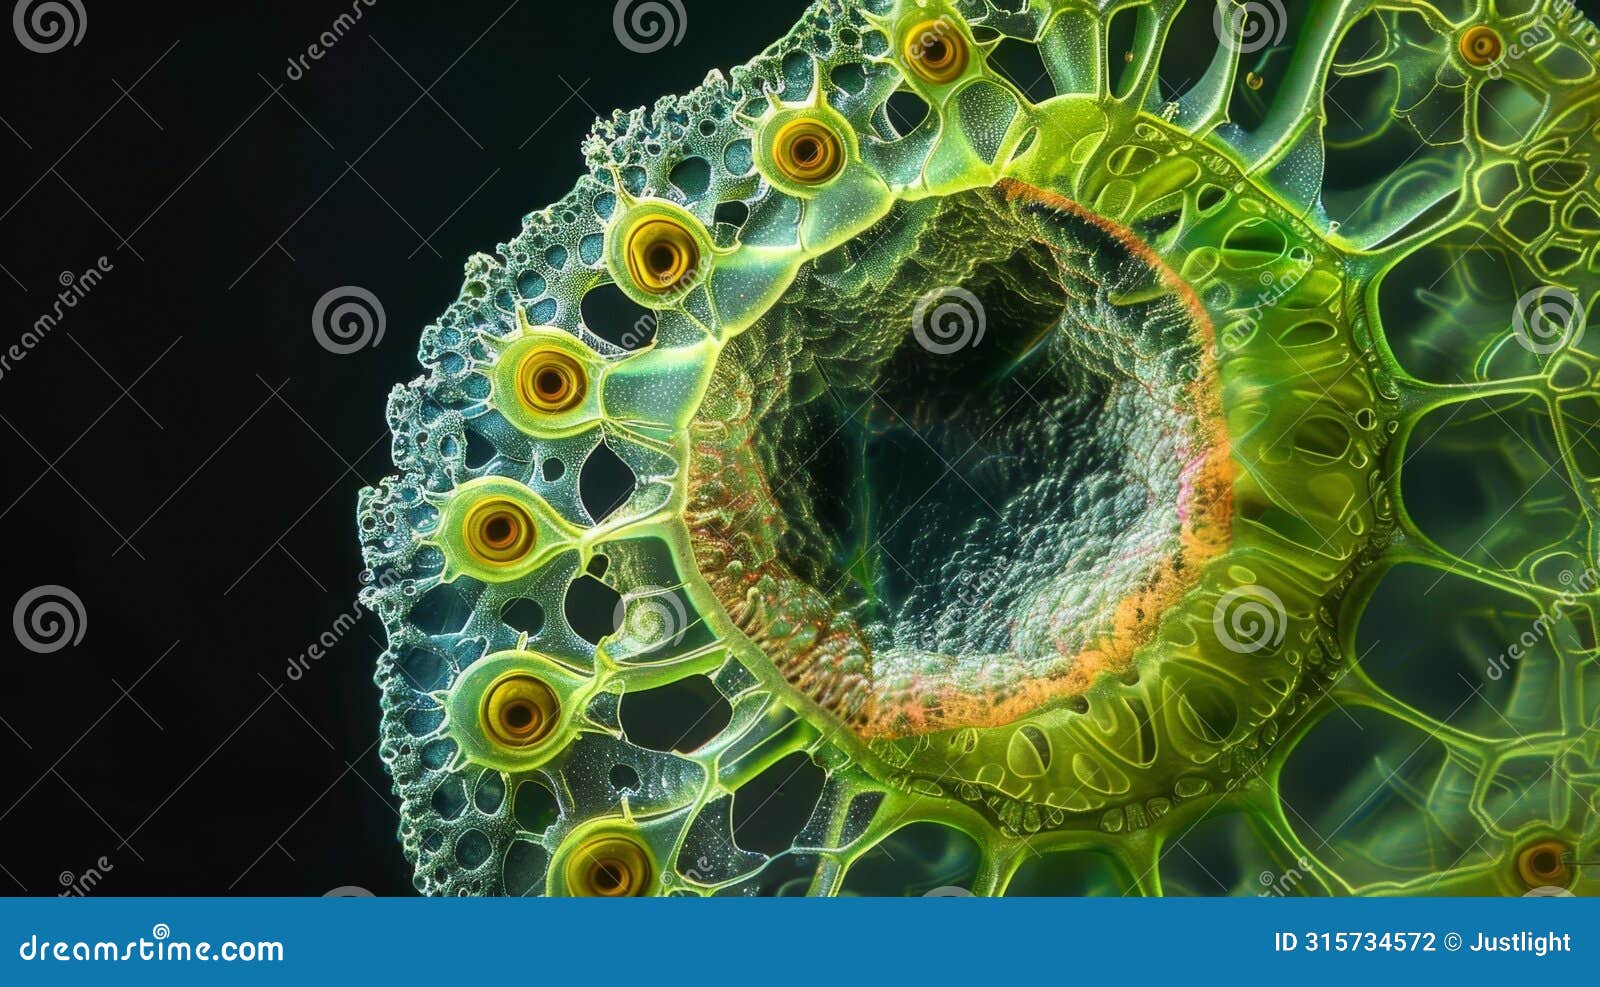 a crosssection of an algal cell revealing its internal structures including a dense and complex nucleus at the center. .